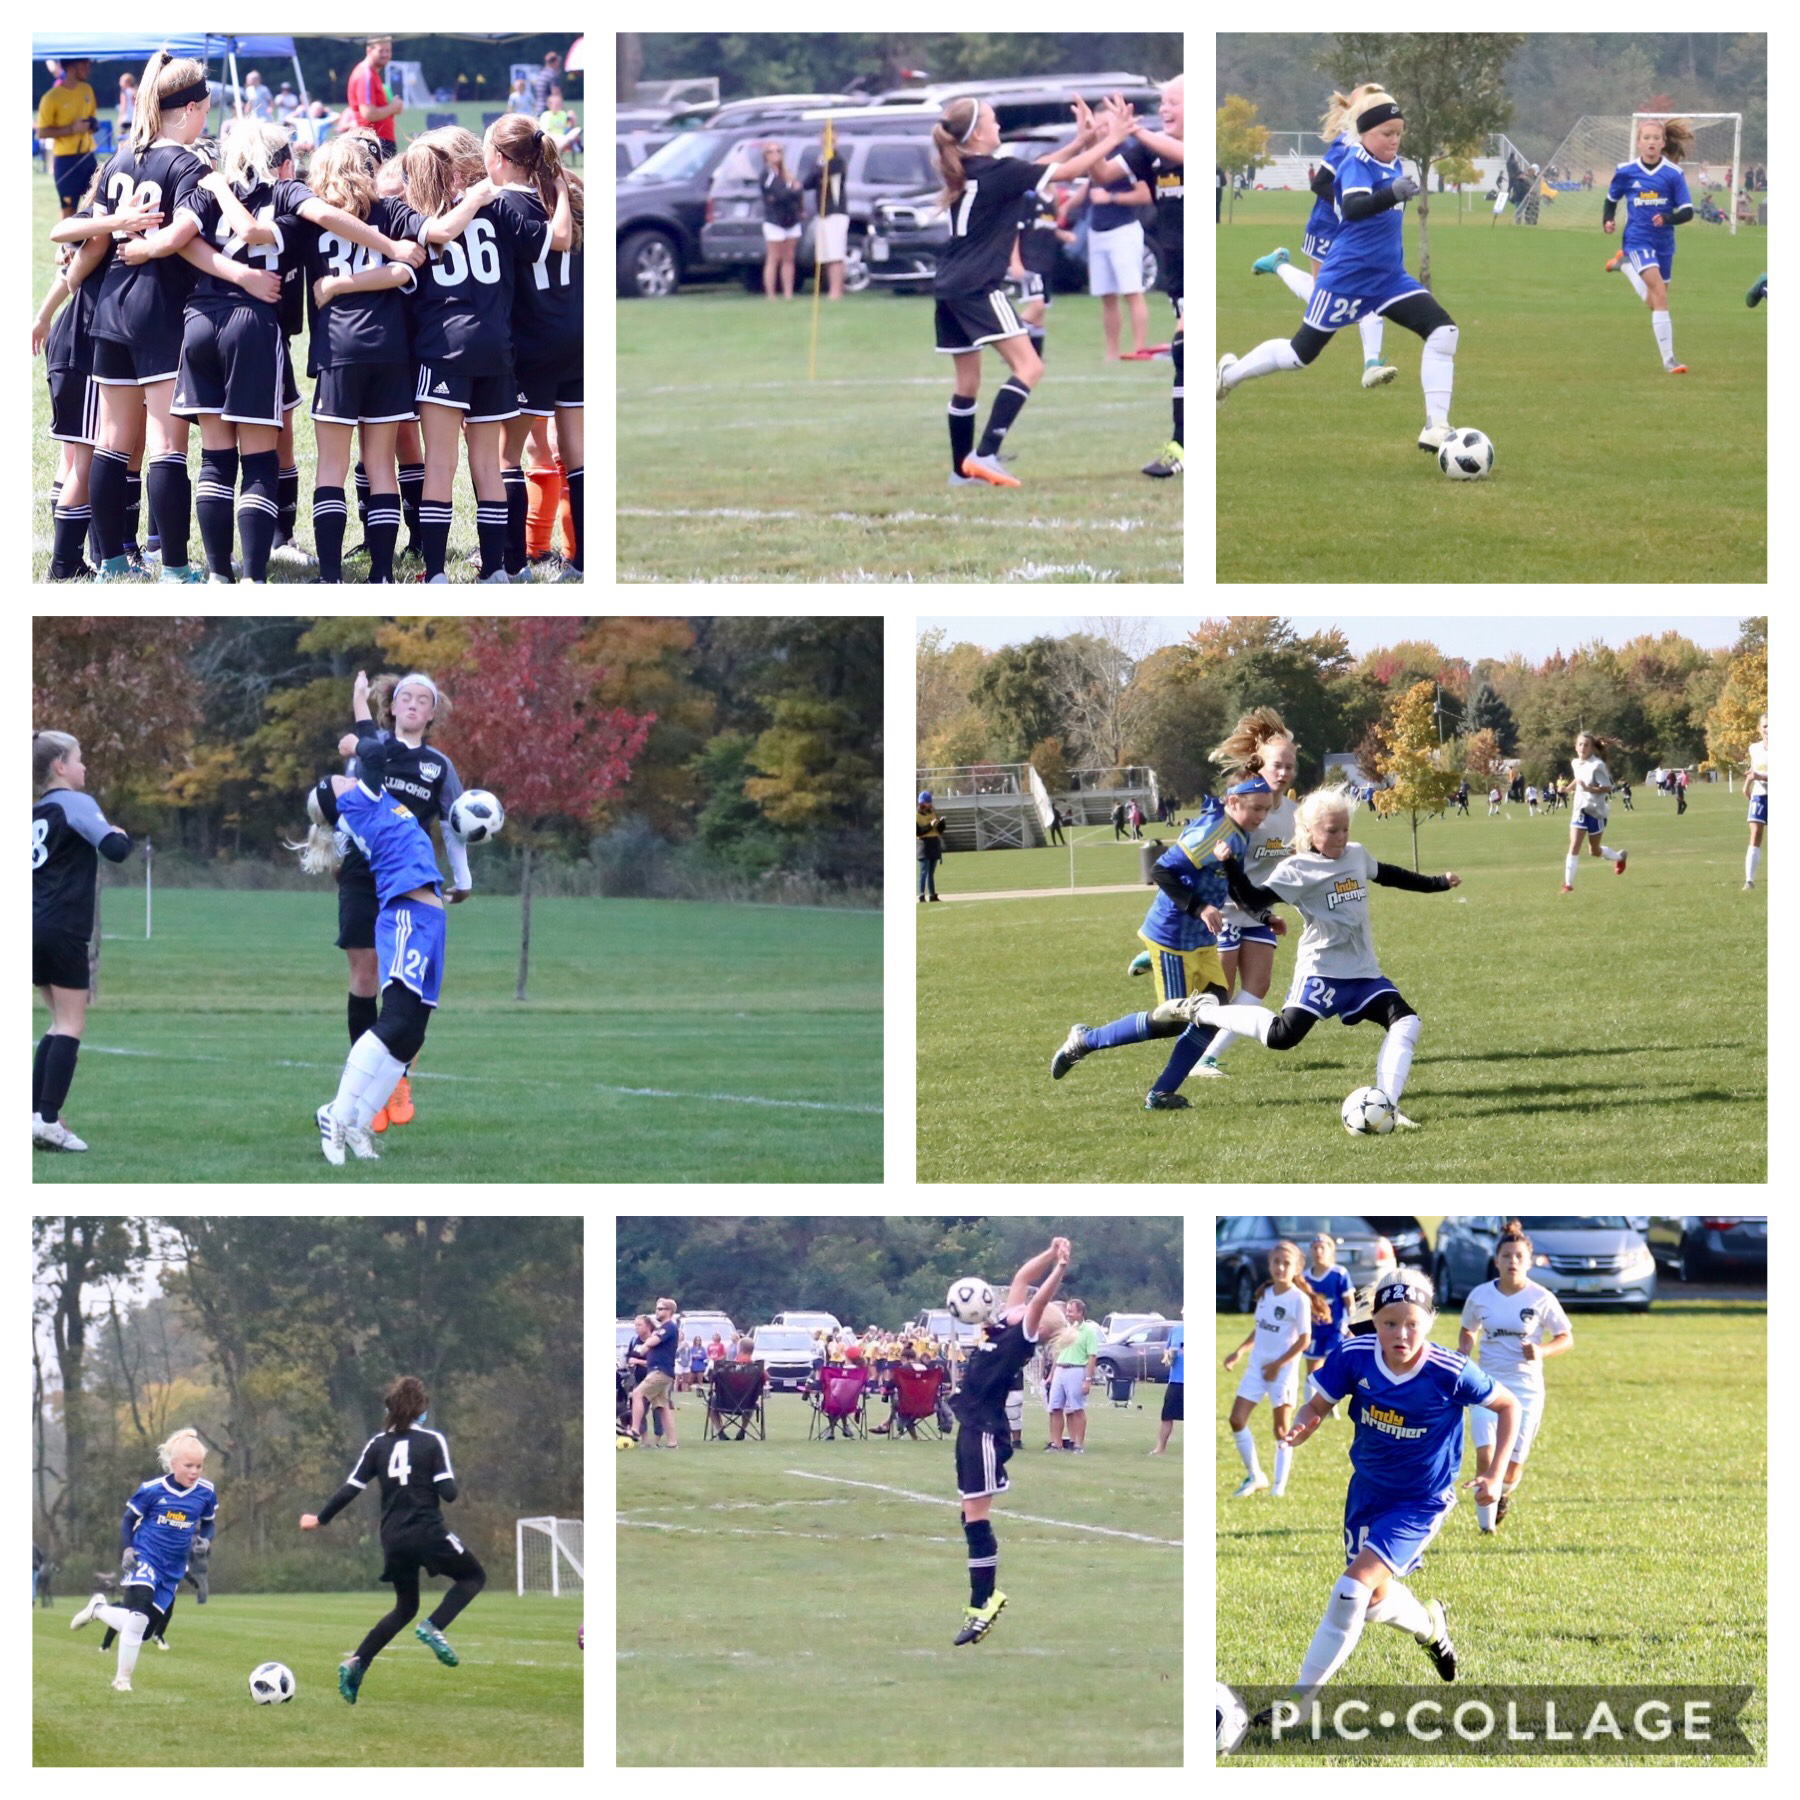 Woohoo 2019 Indy Premier U12 league ended!  Now on too the next!⚽️